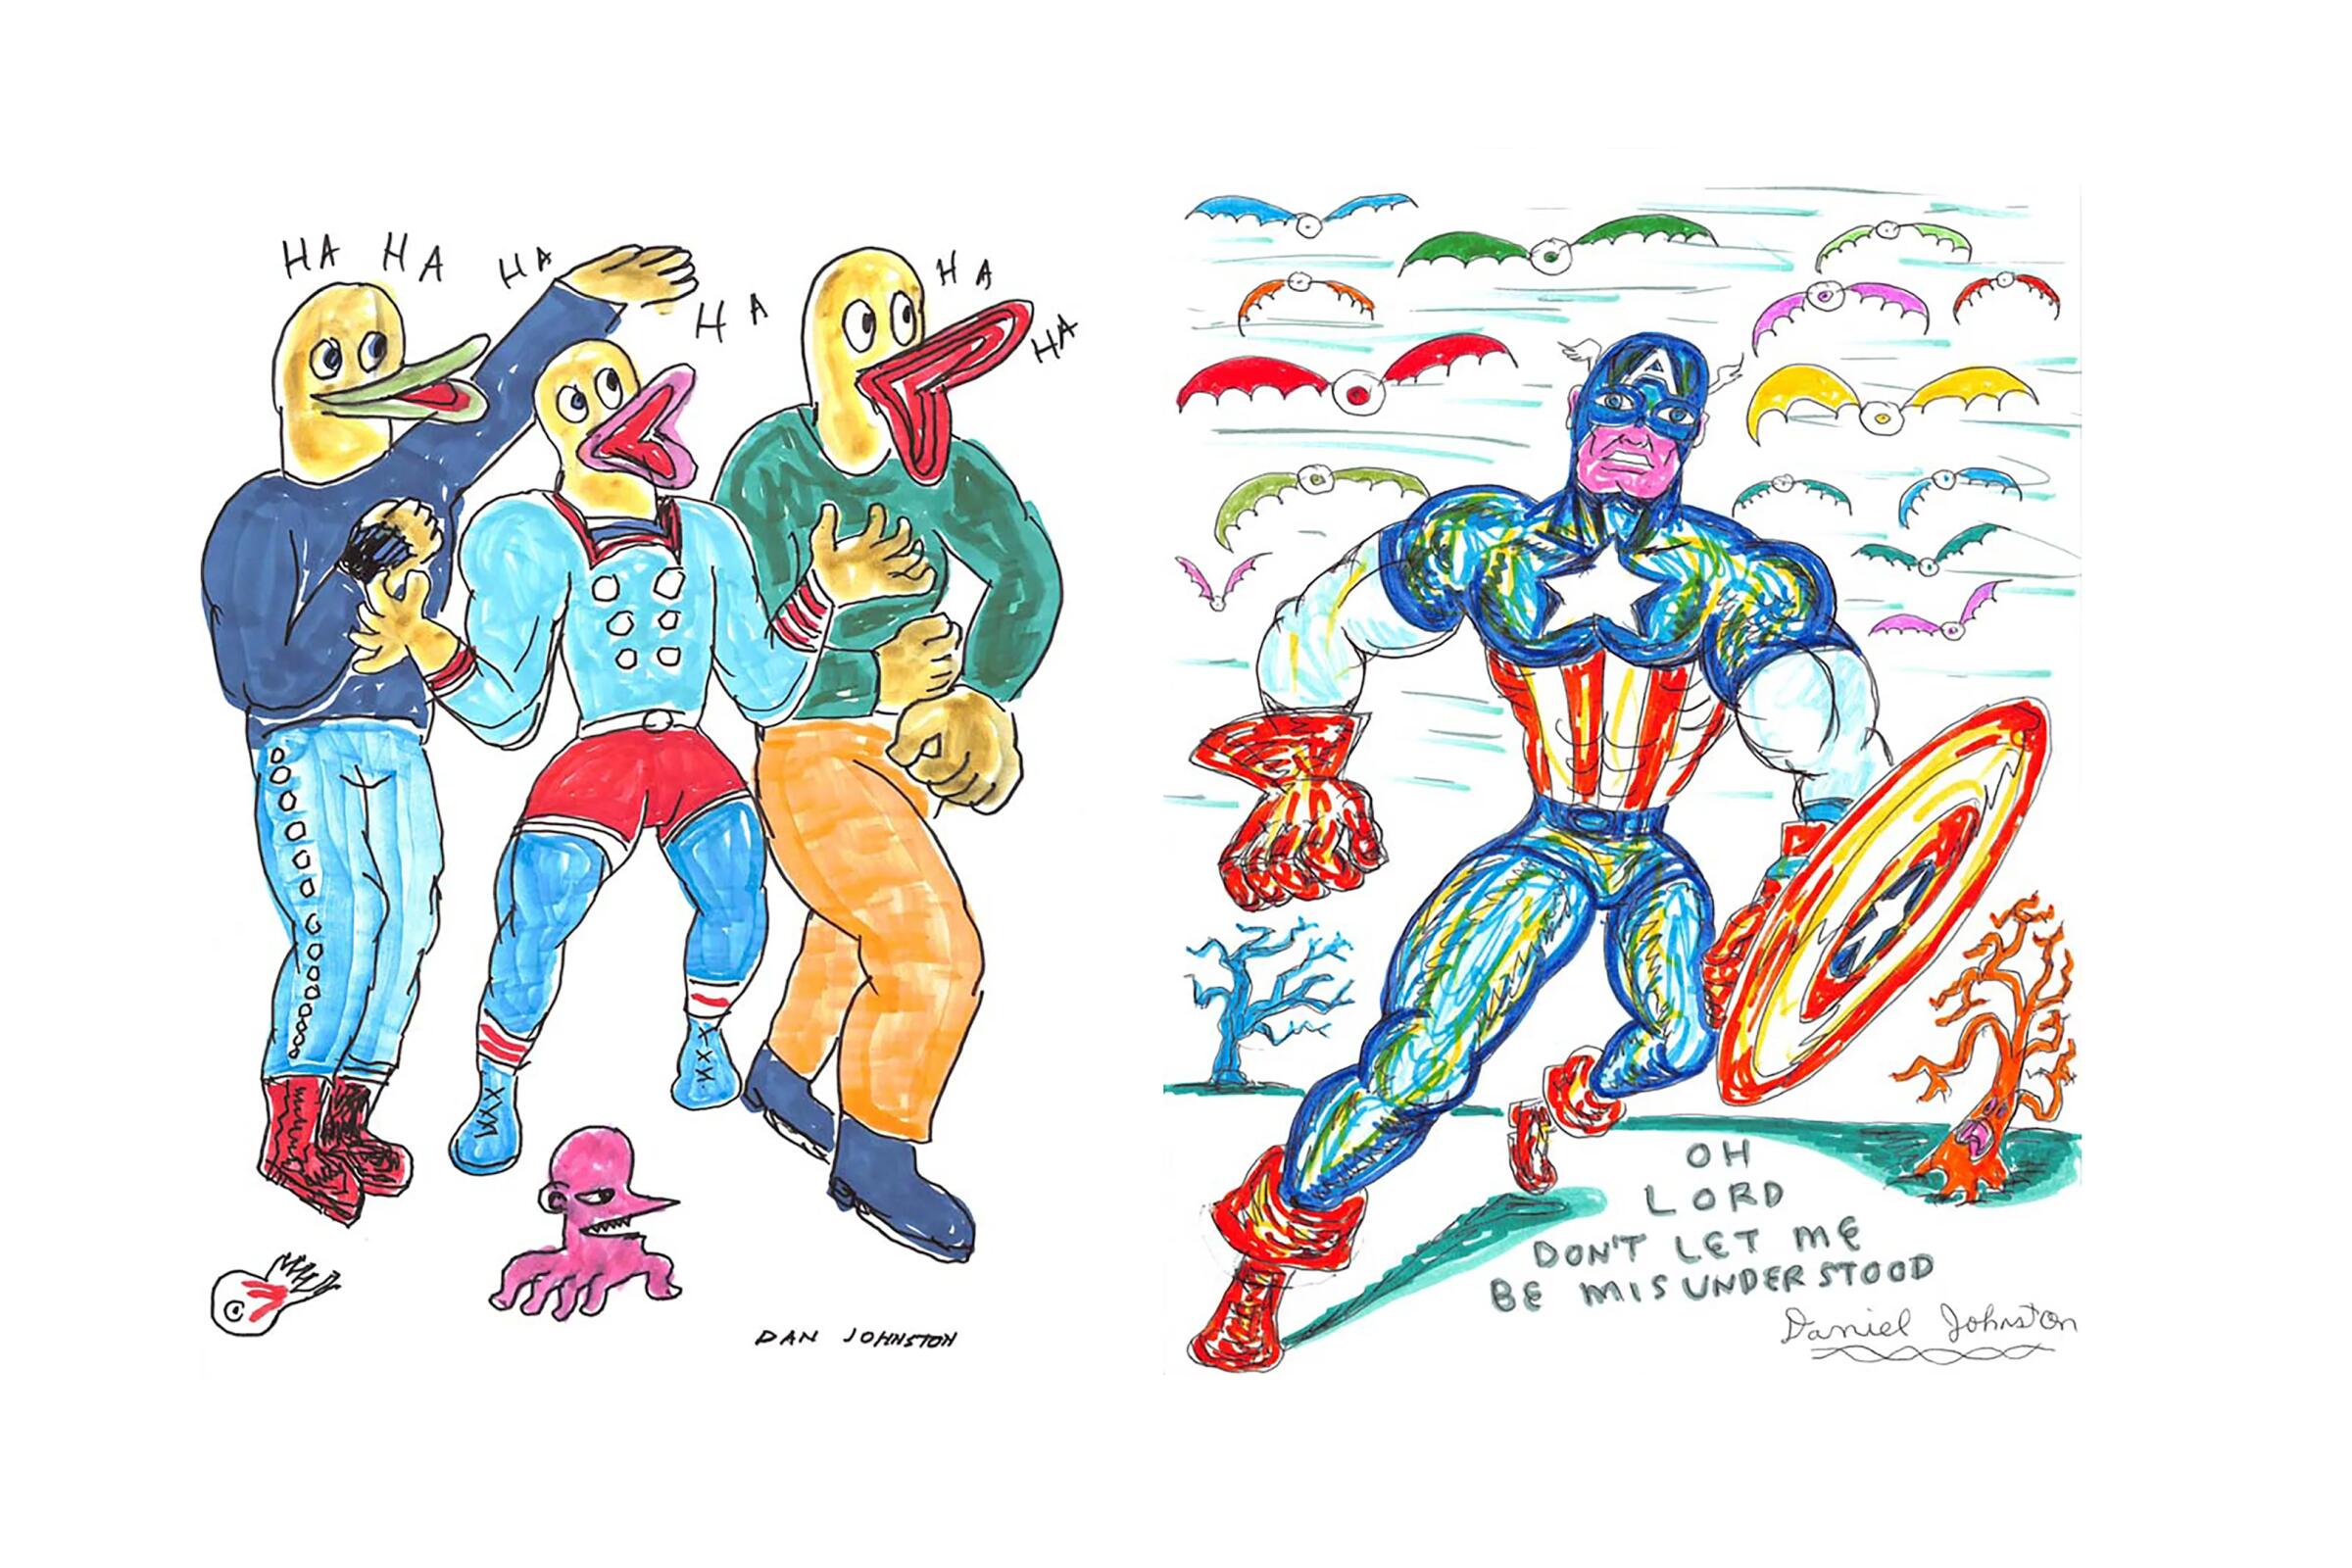 Two works by Daniel Johnston: (left) "Ha Ha Ha," 1998, and "Oh Lord Please Don't Be Misunderstood," (2002)